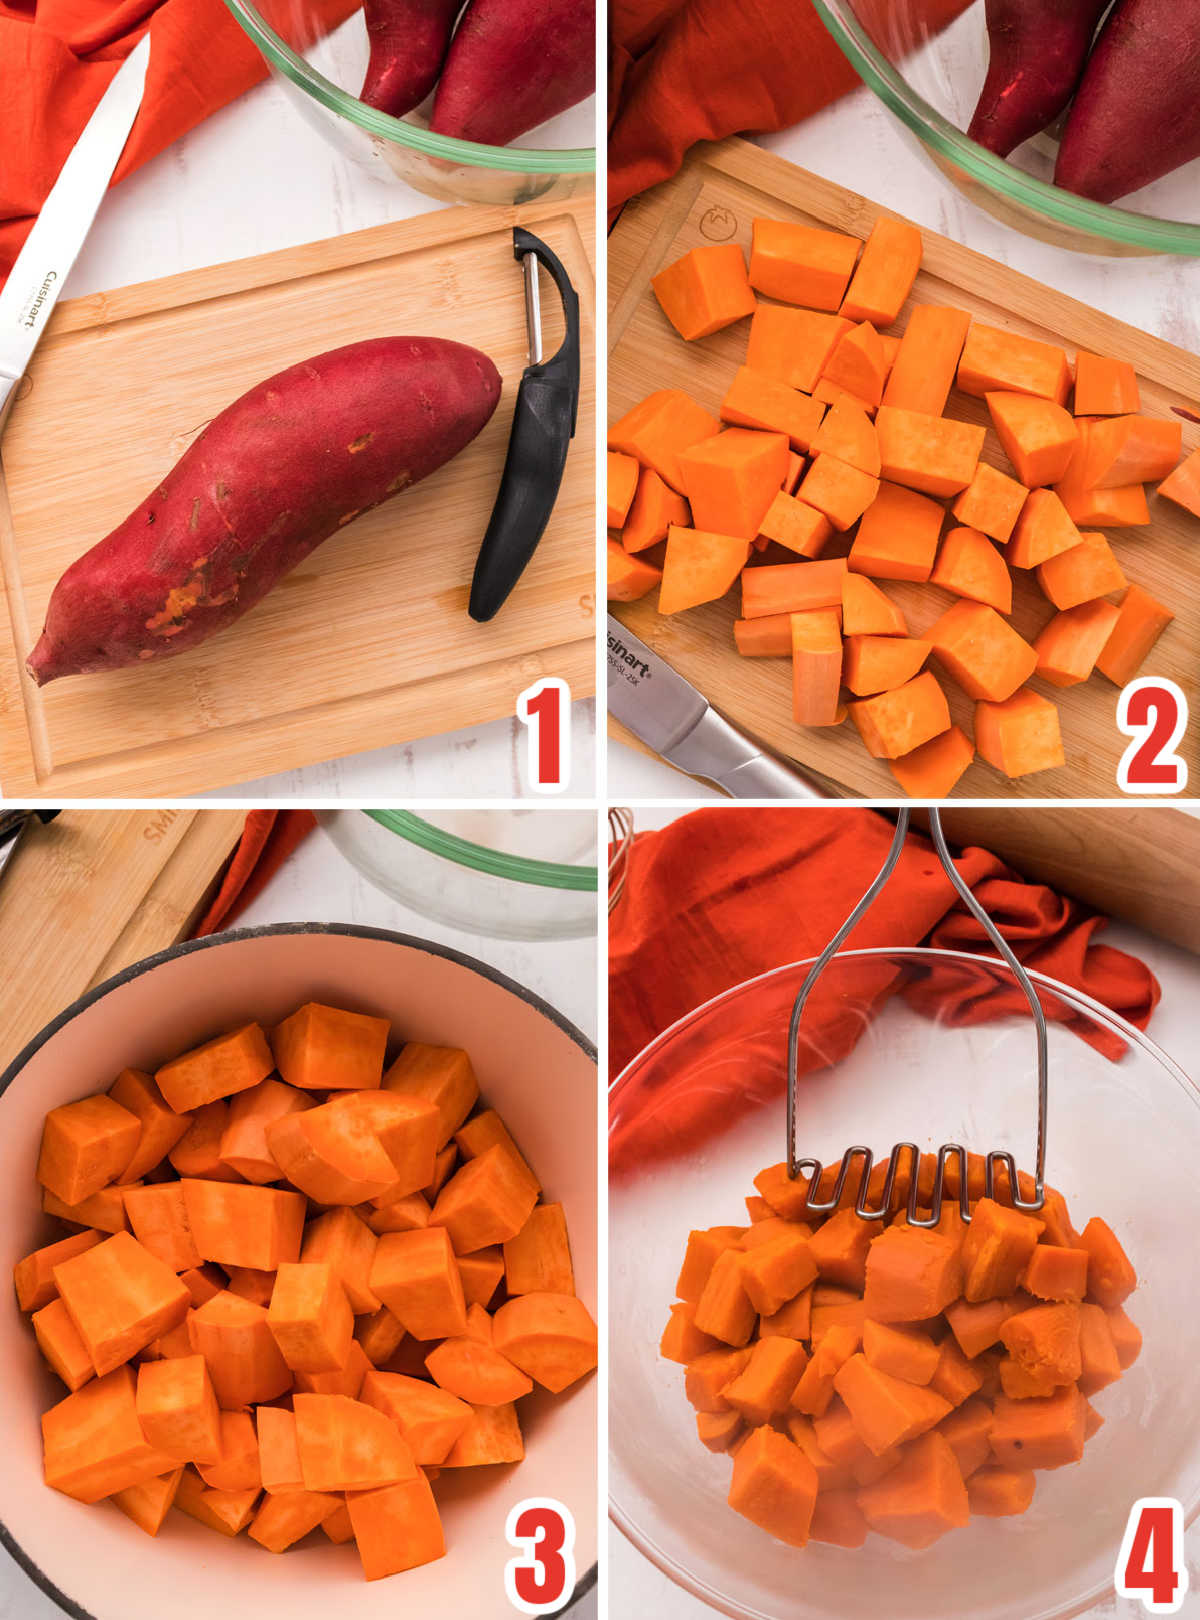 Collage image showing the steps for cooking sweet potatoes to use in the pie filling.